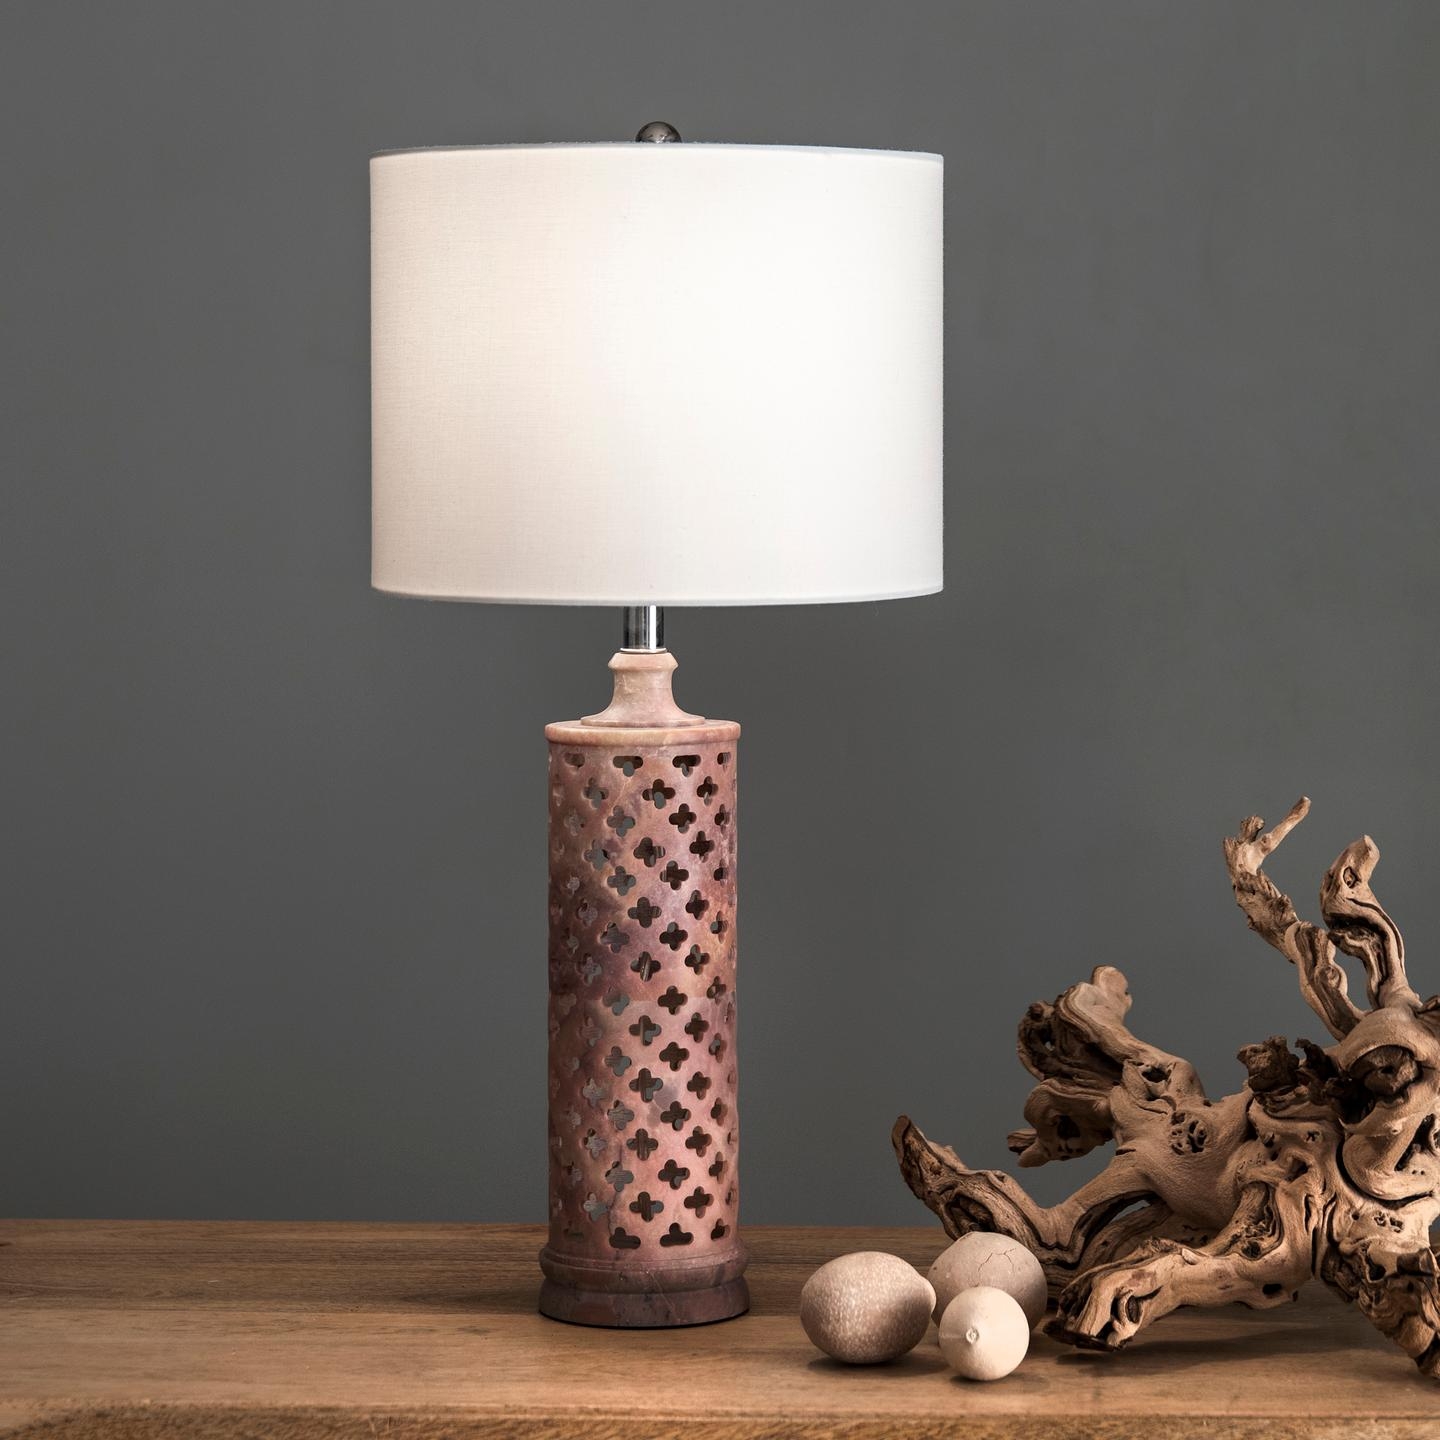  Roy 24" Marble Table Lamp - Image 1